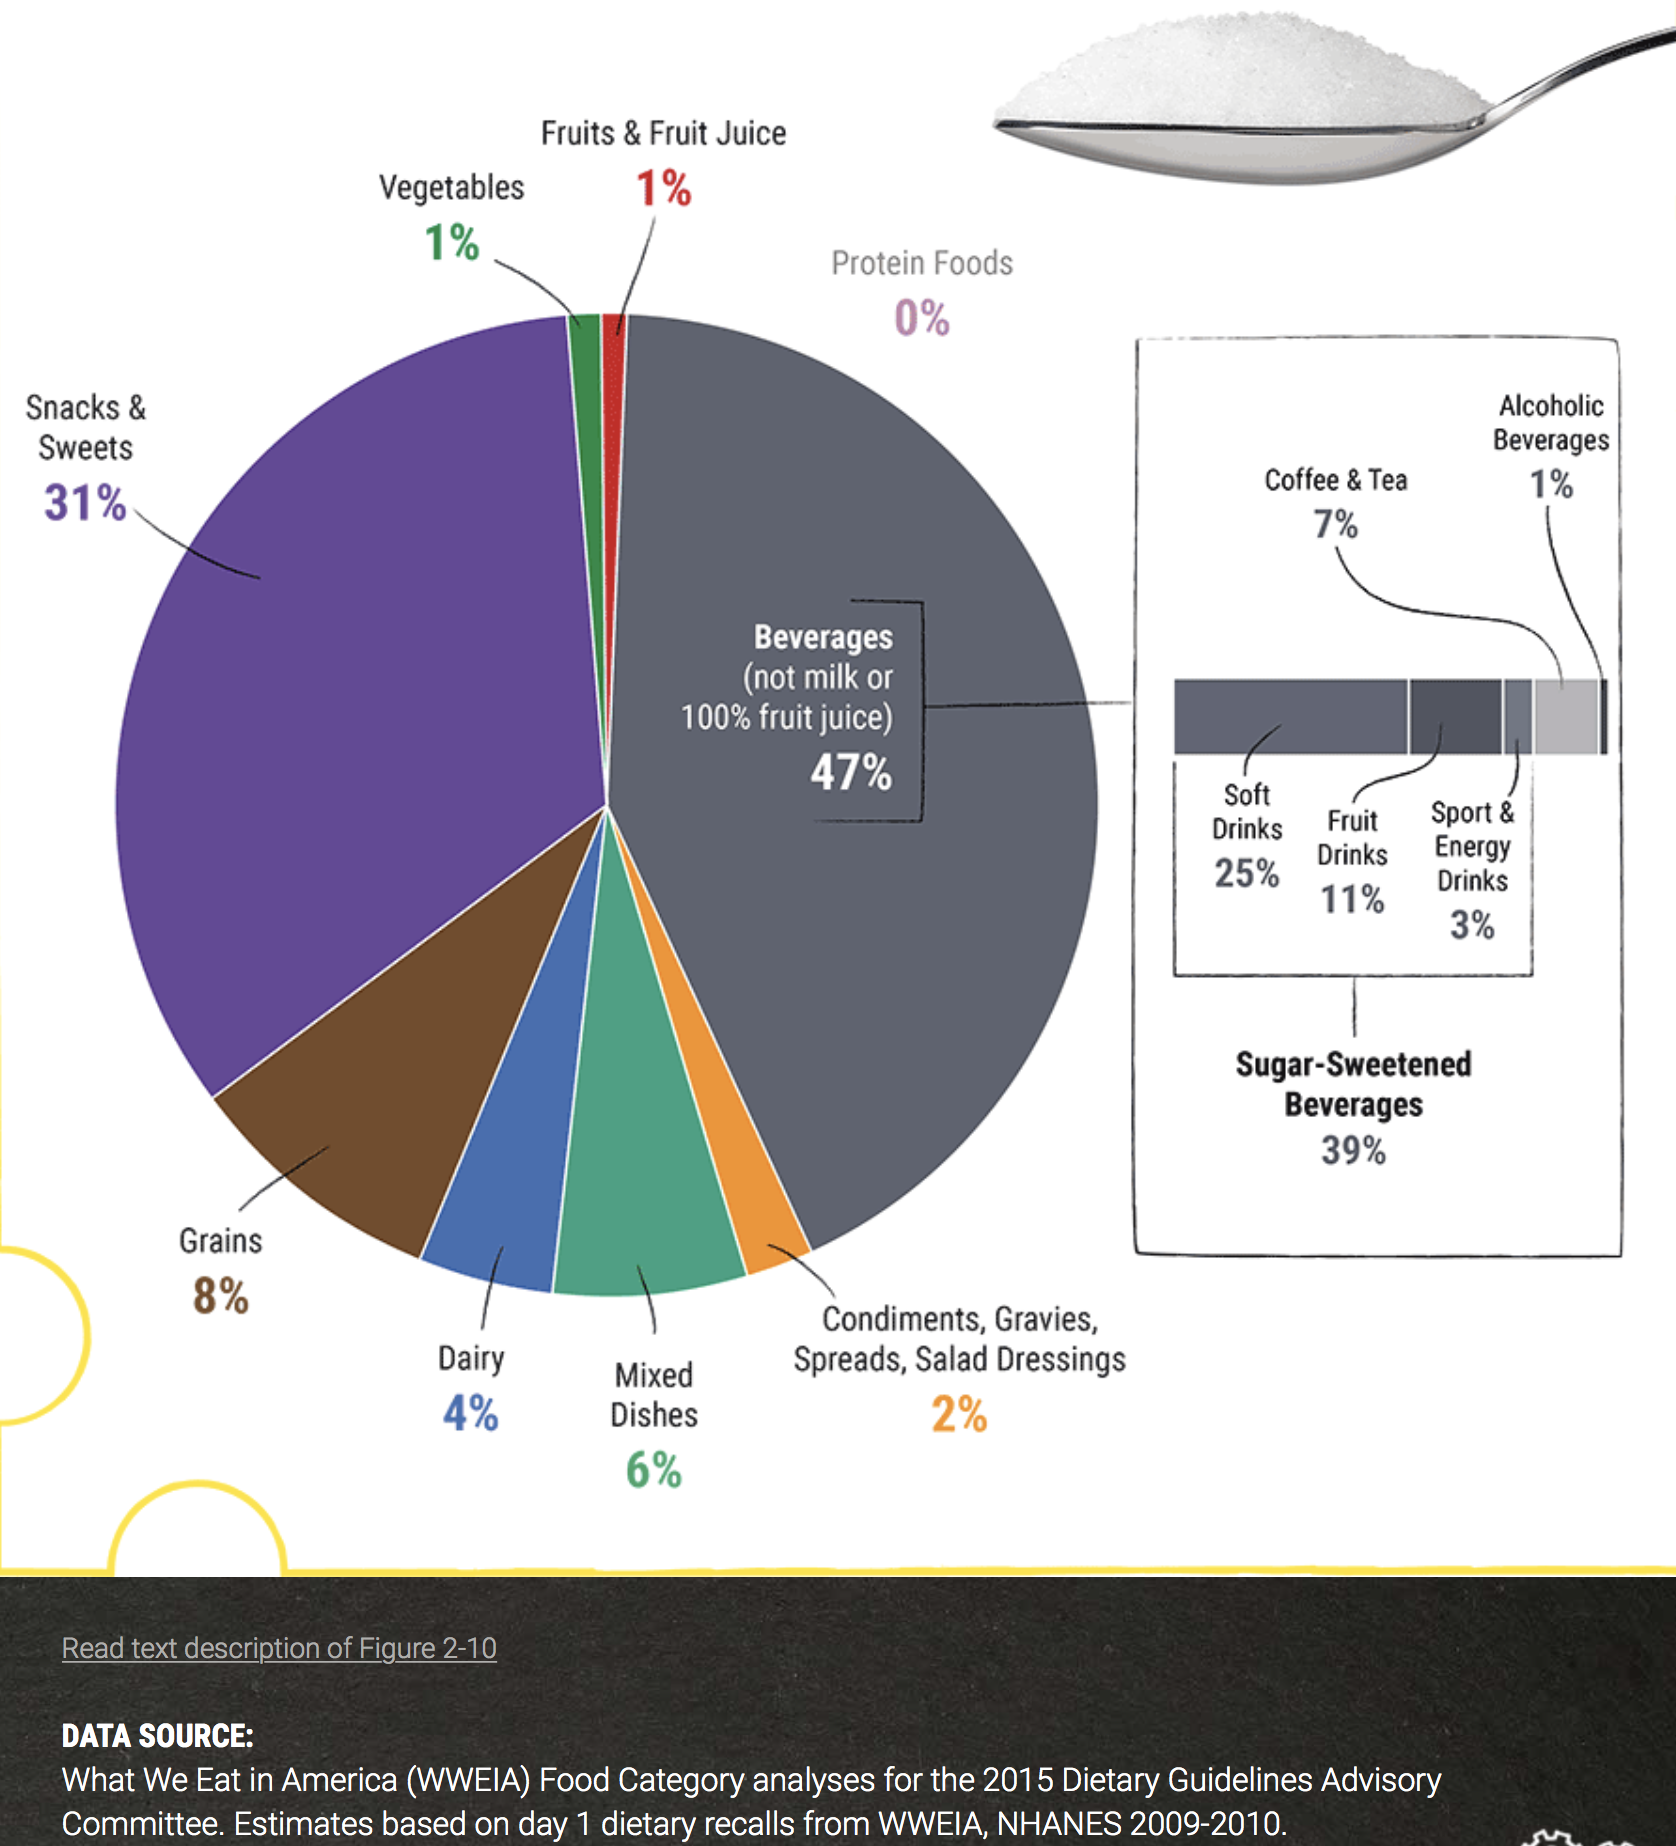 Pie graph of "What we Eat in America" conveys a percentage breakdown of consumed foods. Condiments, Gravies, Spreads, Salad Dressings: 2% Mixed Dishes: 6% Dairy: 4% Grains: 8% Snacks and Sweets: 31% Vegetables: 1% Fruits and Fruit Juices: 1% Protein Foods: 0% Beverages (not milk or 100% fruit juice): 47%. This is broken down into Sugar-Sweetened Beverages: 39% (Soft Drinks: 25%, Fruit drinks: 11%, Sport and Energy Drinks: 3%) and Coffee and Tea: 7% and Alcoholic beverages: 1%.  Caption reads: Data Source: What We Eat in America (WWEIA) Food Category analyses for the 2015 Dietary Guidelines Advisory Committee. Estimates based on day 1 dietary recalls from WWEIA, NHANES 2009-2010.